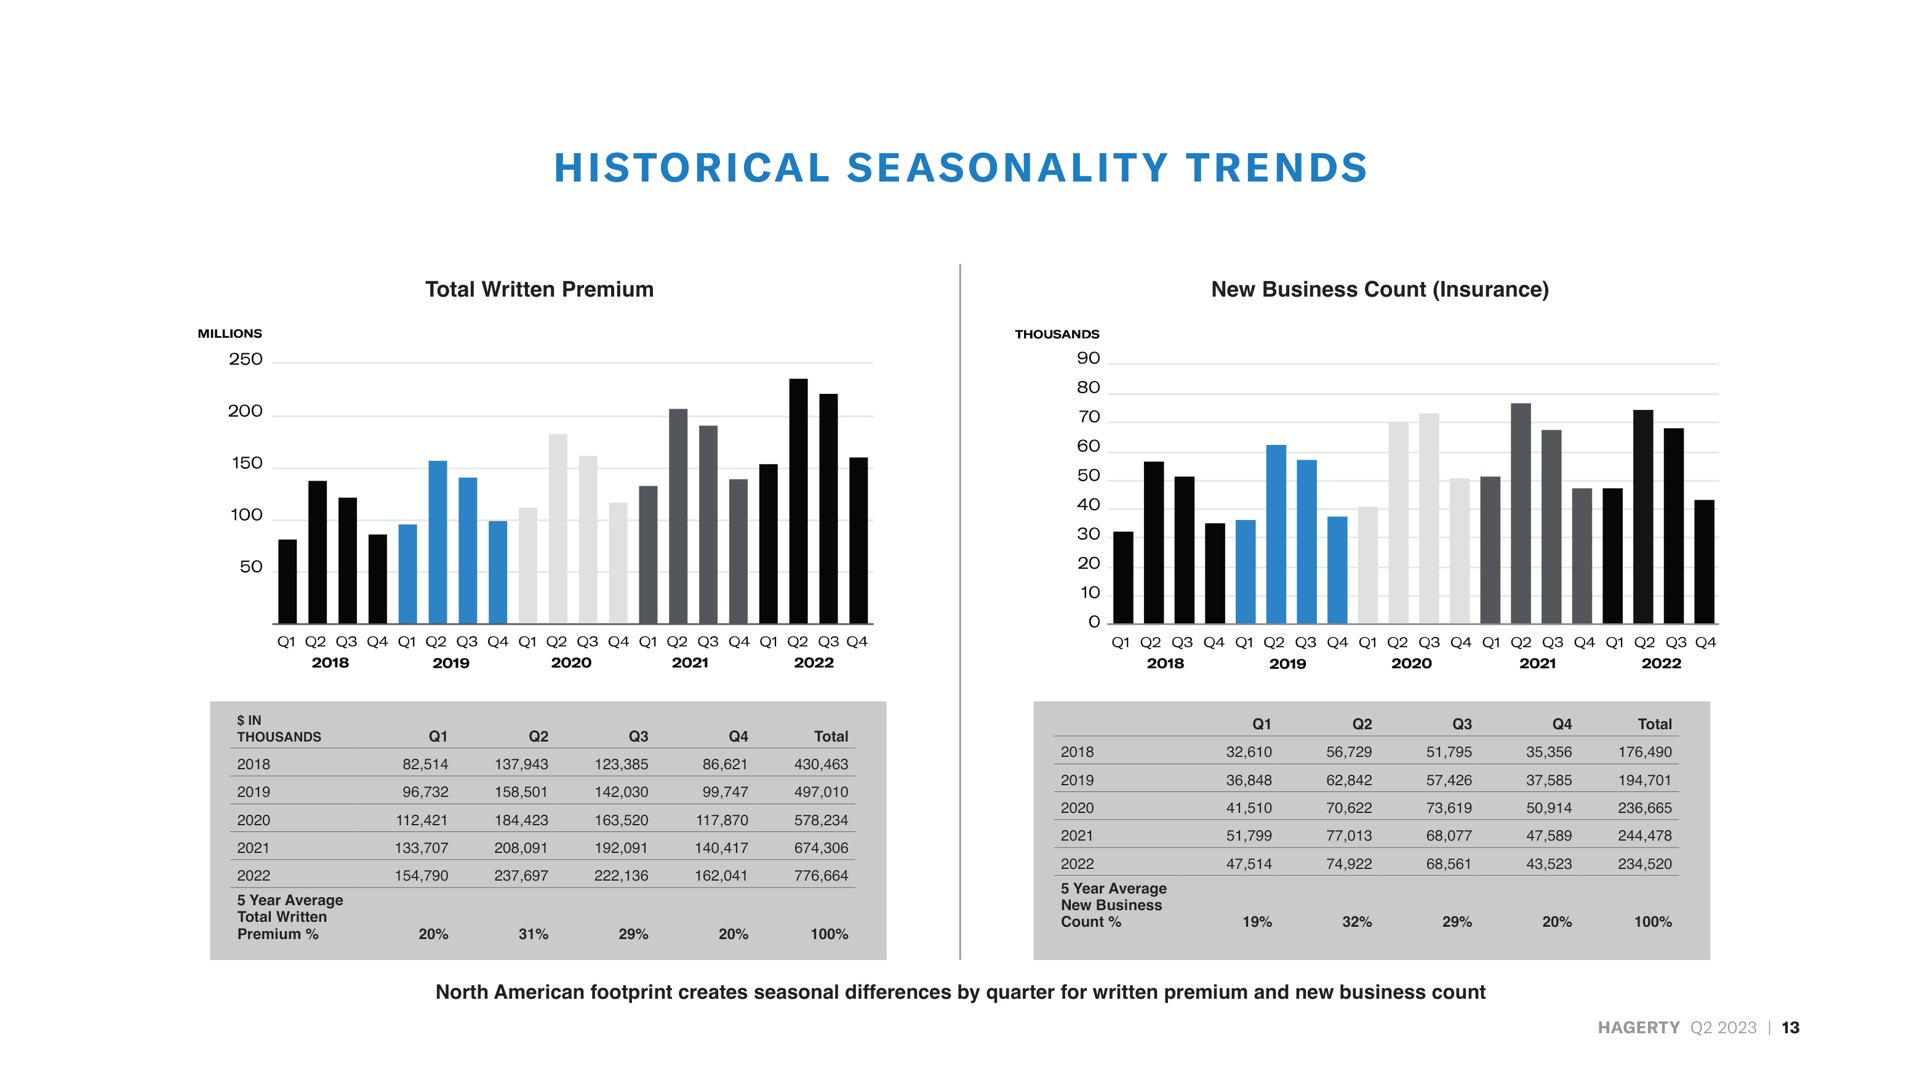 a son i historical seasonality trends | Hagerty